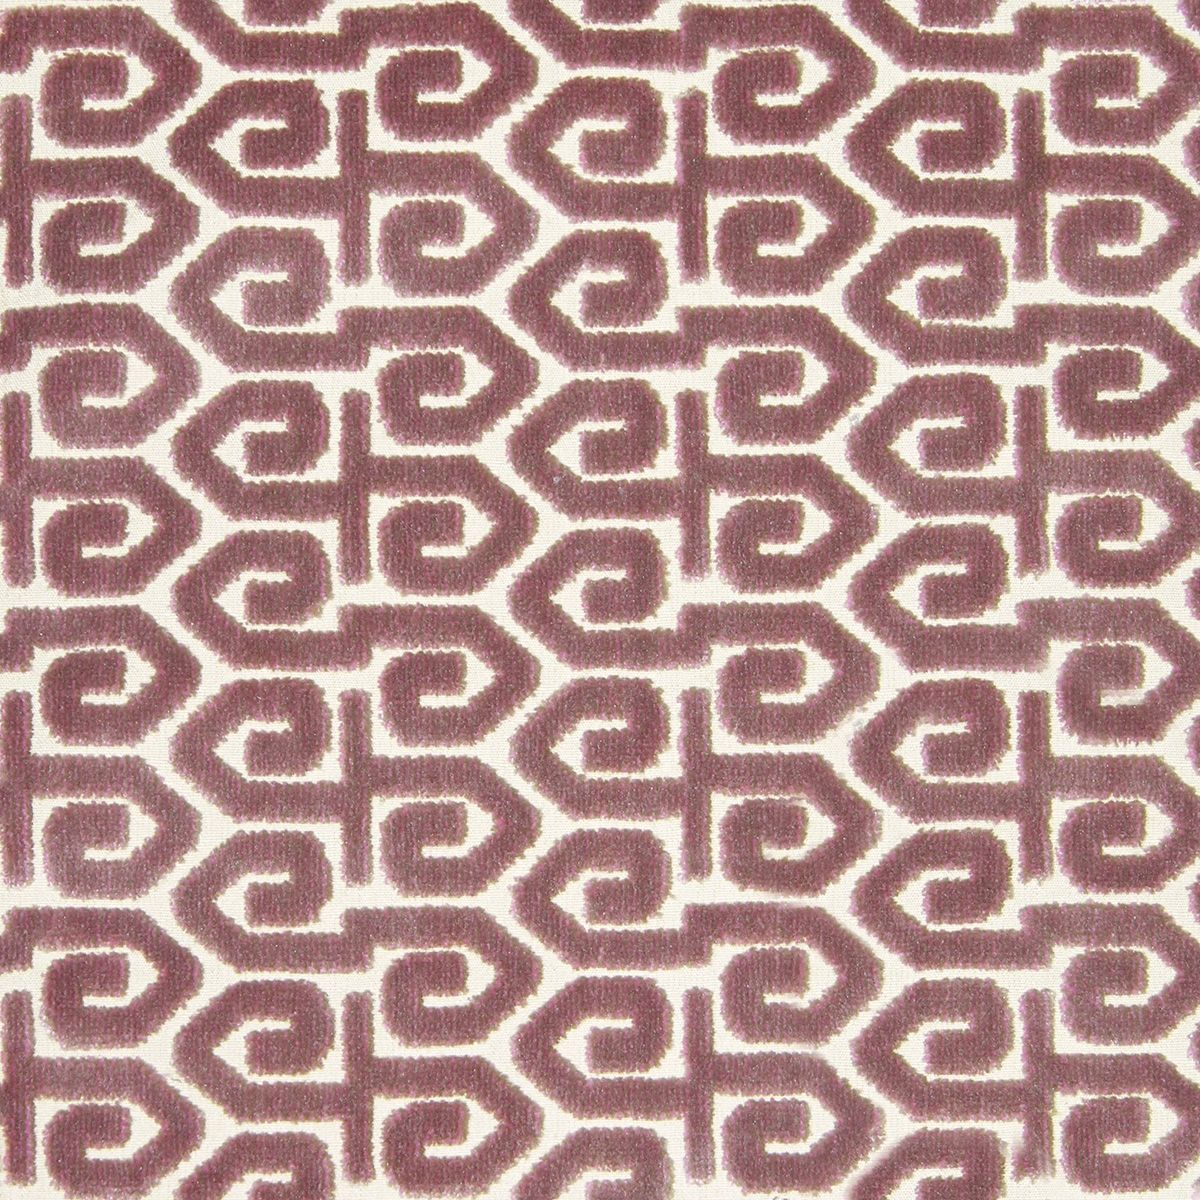 Halland fabric in mauve color - pattern number M5 00738496 - by Scalamandre in the Old World Weavers collection